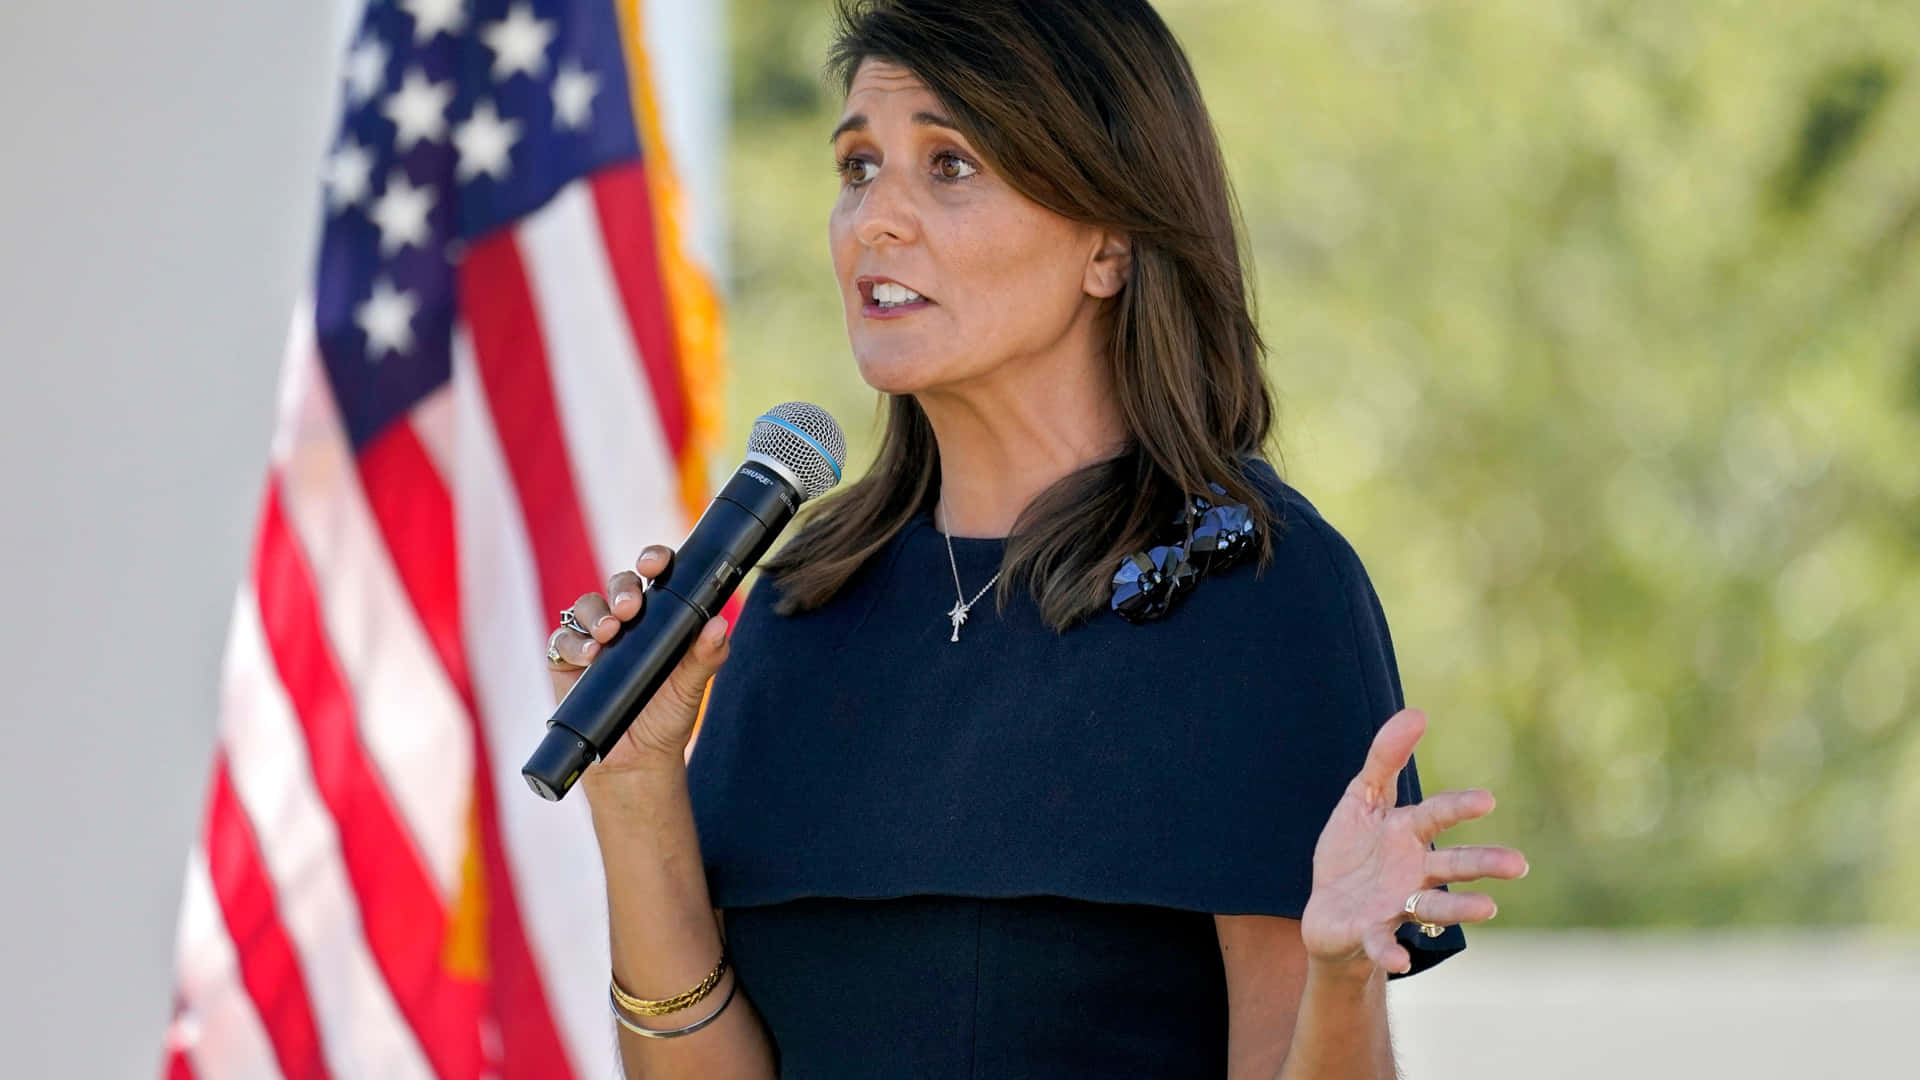 Nikki Haley delivering a speech holding a microphone Wallpaper